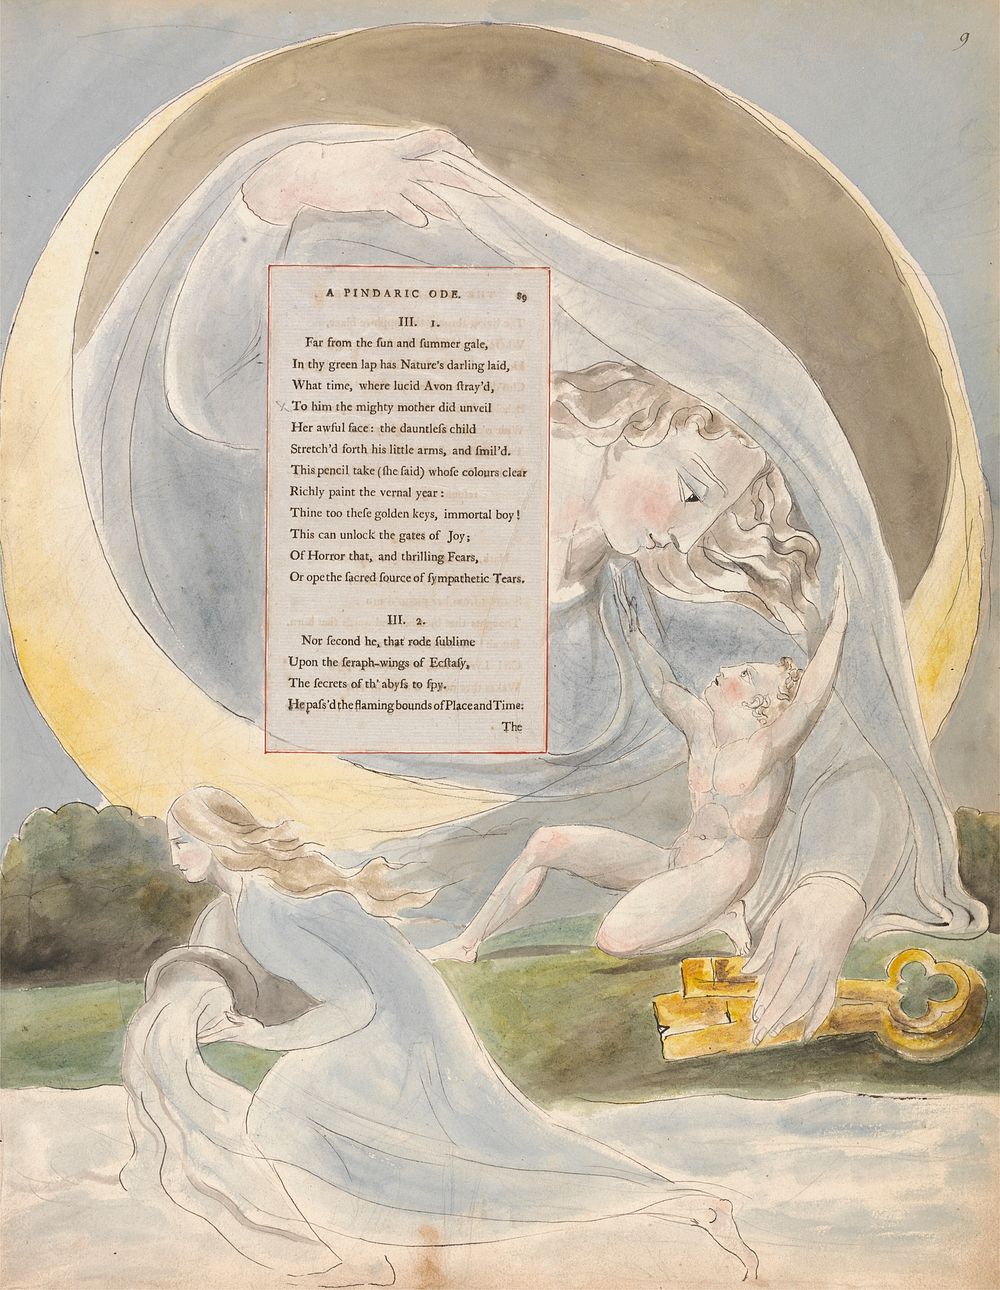 The Poems of Thomas Gray, Design 49, "The Progress of Poesy." by William Blake. Original public domain image from Yale…